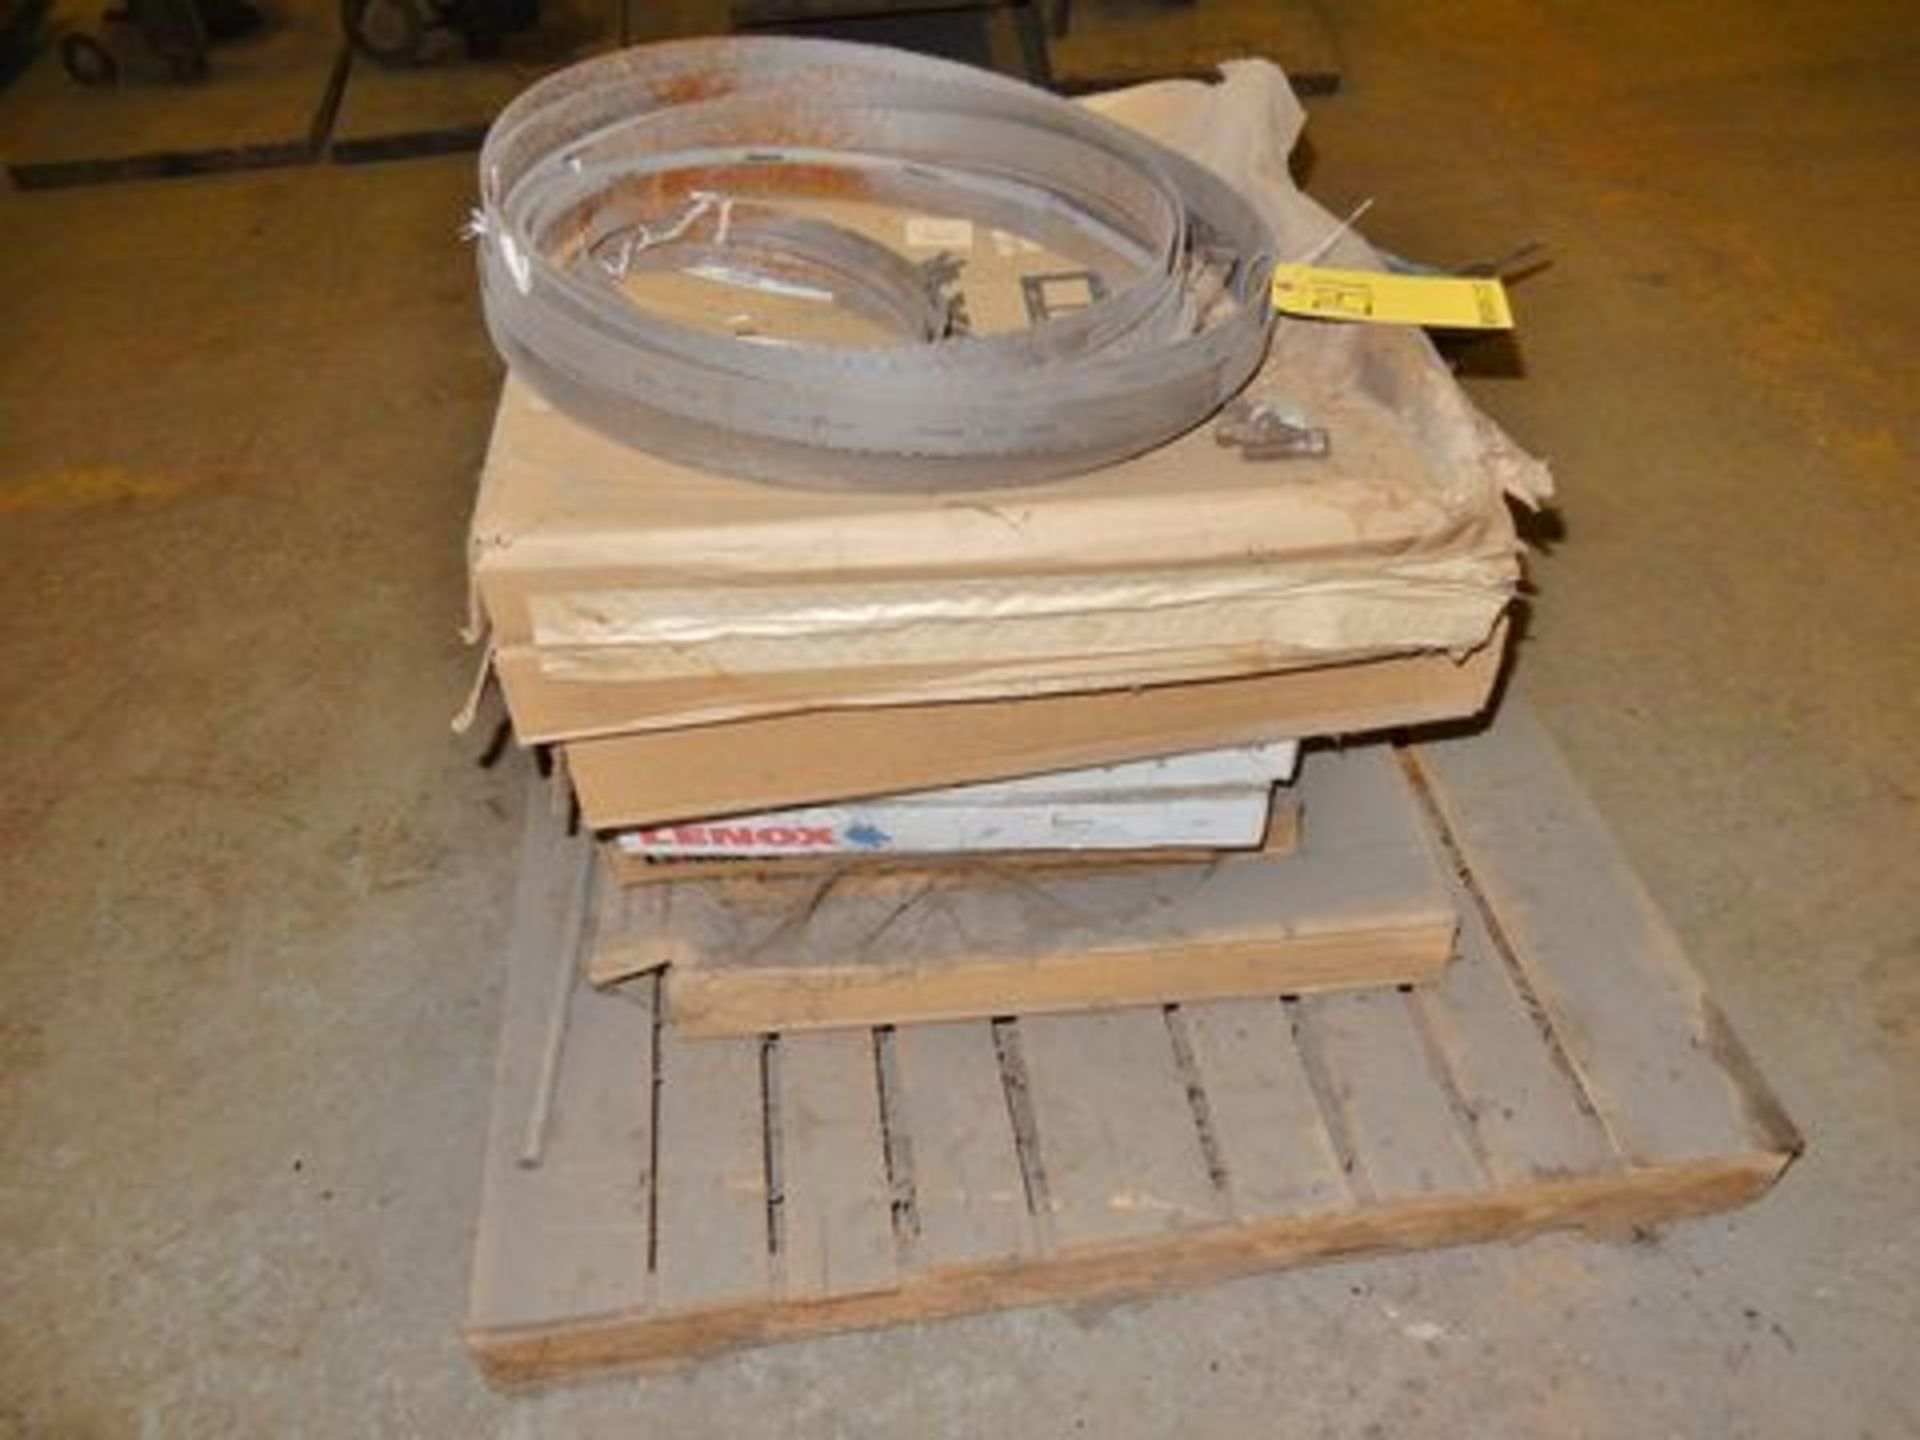 LOT MISC. BANDSAW BLADES, VARIOUS SIZES